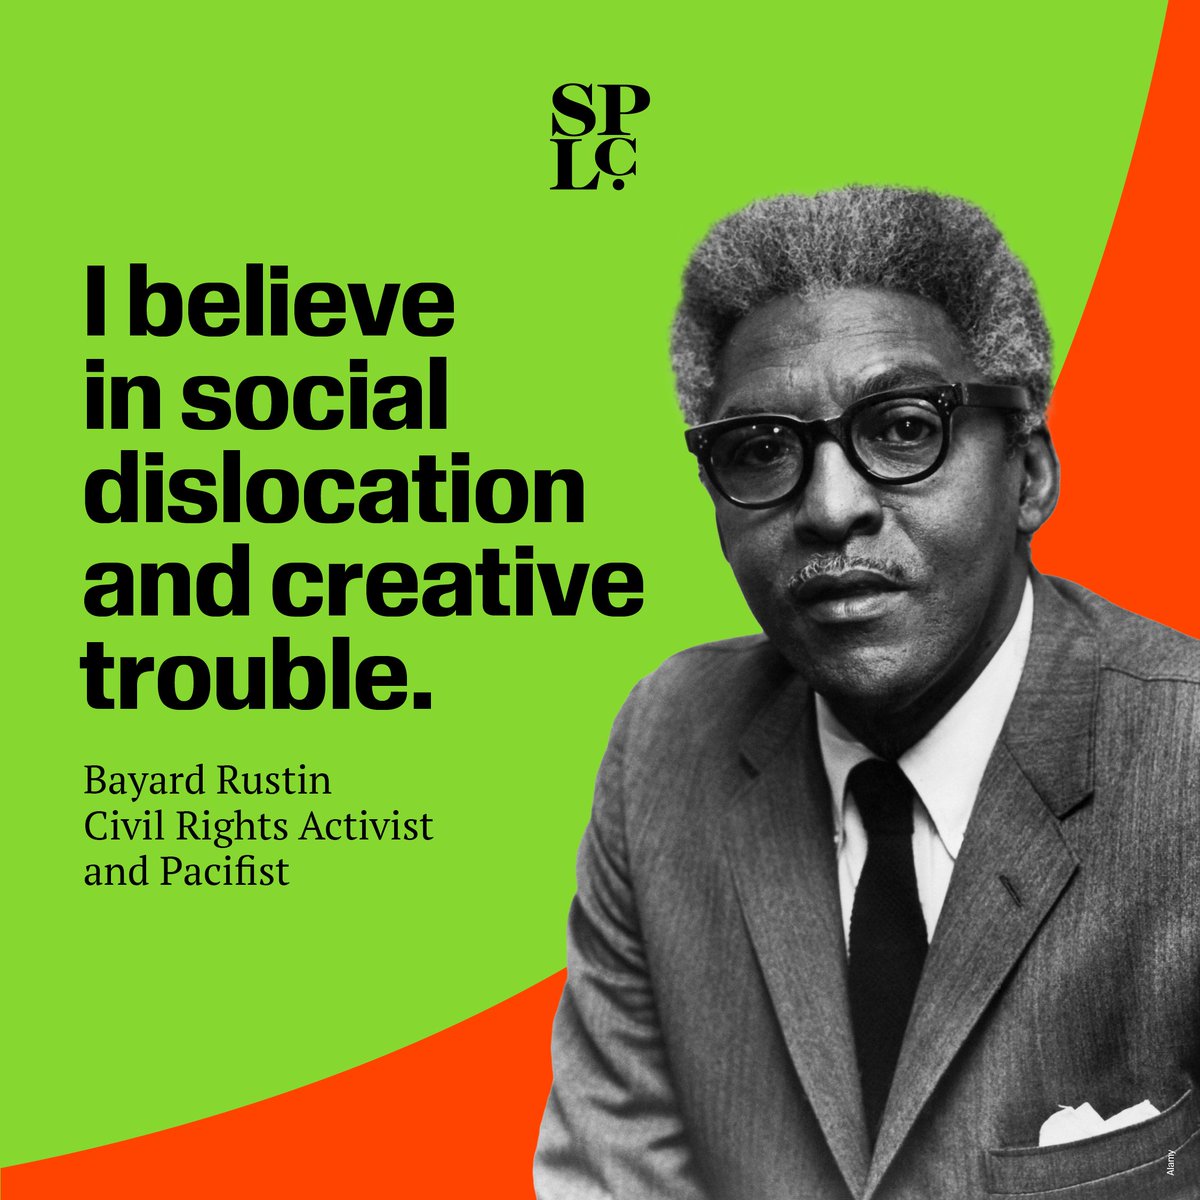 #OTD, we celebrate #BayardRustin's legacy as a visionary leader, organizer of the historic #MarchOnWashington and activist for civil, social and gay rights. ✊

#TheMarchContinues as we continue the fight for a more just and equitable world. #LGBTQRights